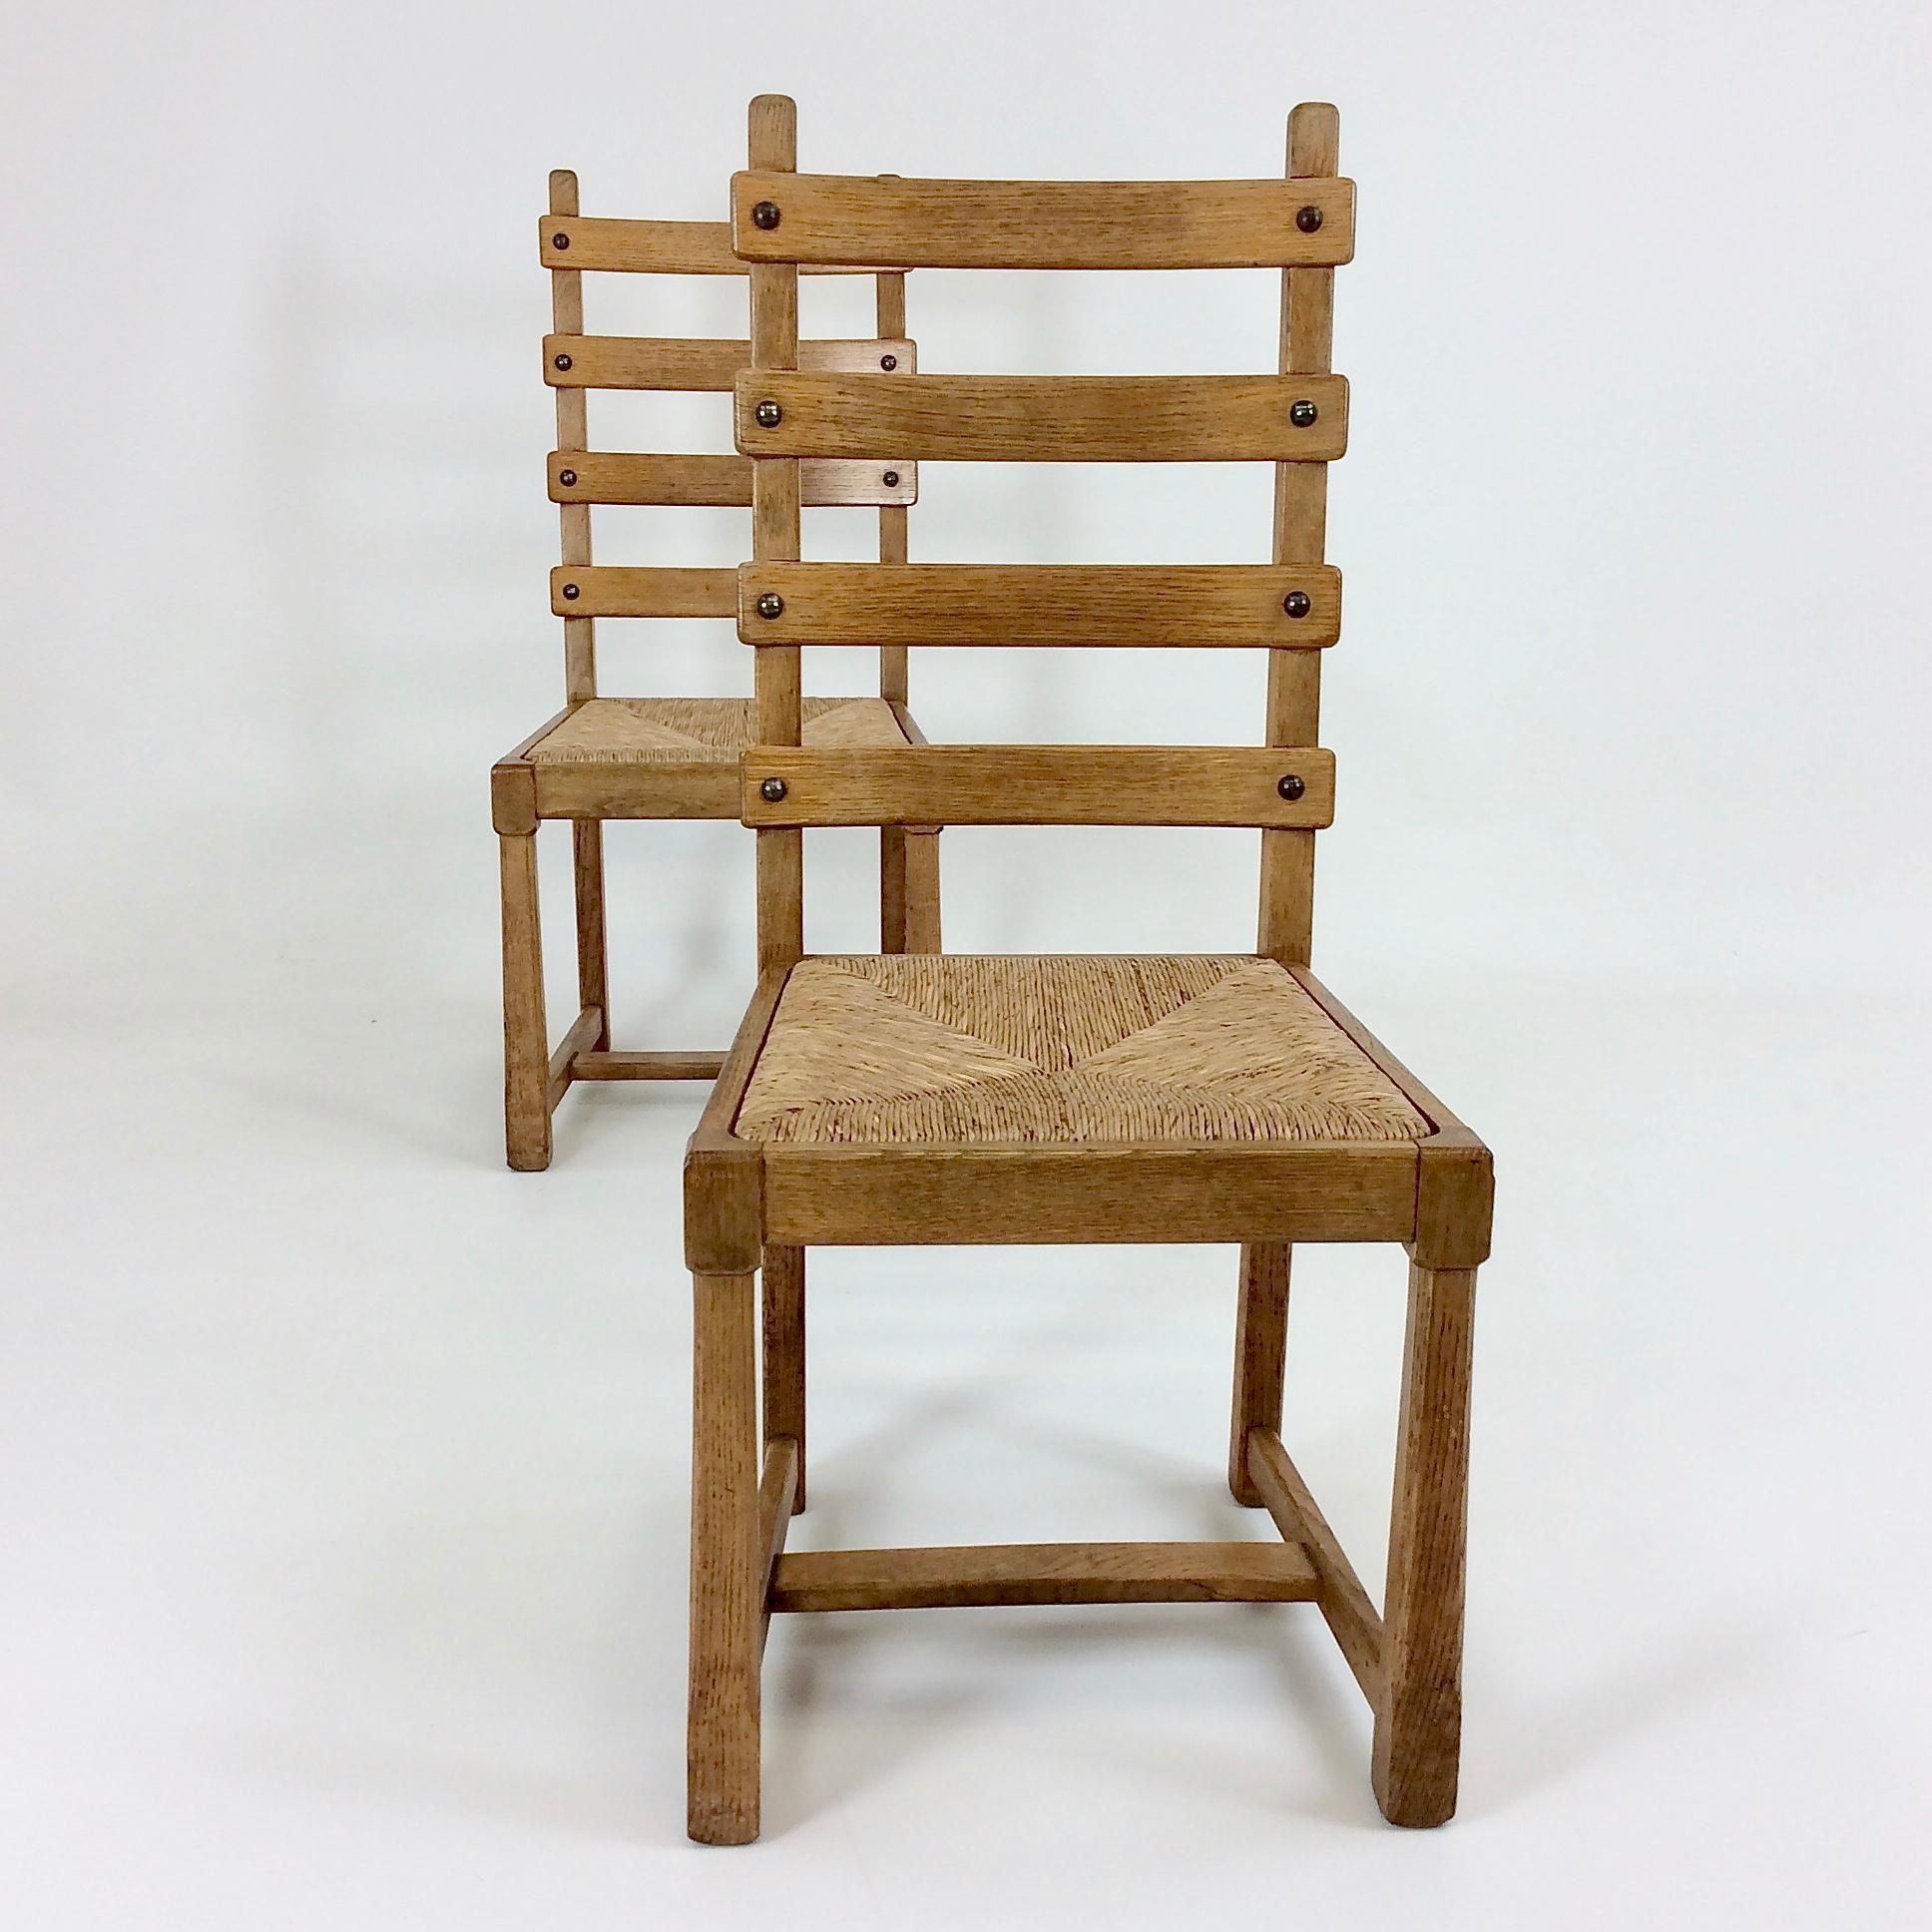 Elegant pair of Scandinavian chairs, circa 1950, Scandinavia.
Oak, straw seat.
Dimensions: 103 cm H, 47 cm W, 50 cm D, seat height 45 cm.
Two other pairs available.
Good original condition.
All purchases are covered by our Buyer Protection